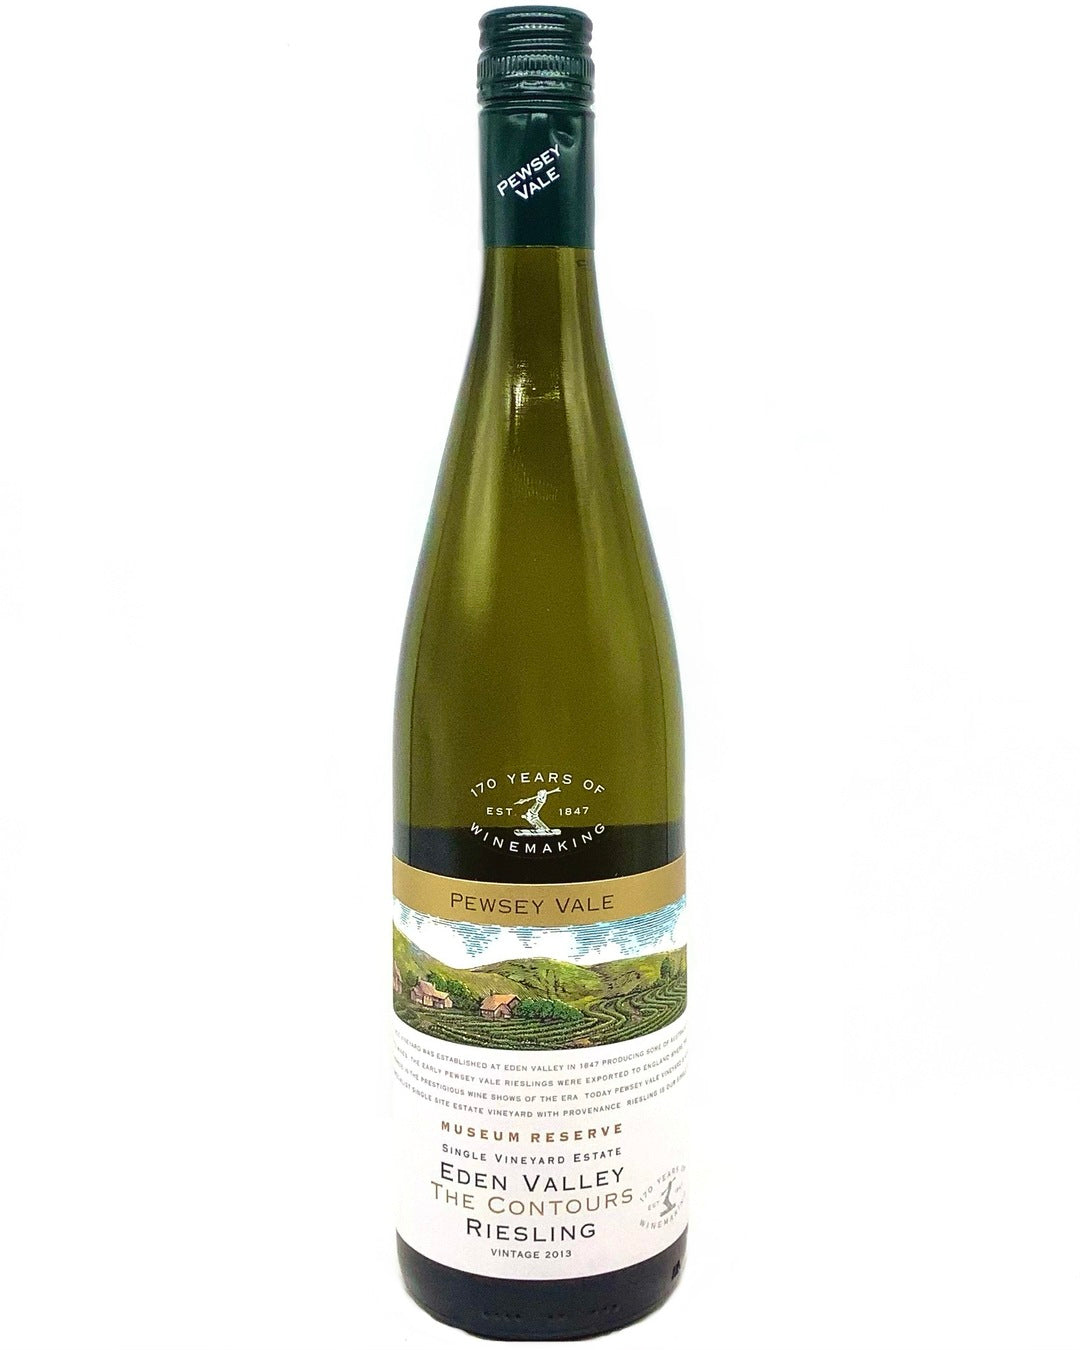 Pewsey Vale, Riesling "The Contours" Museum Reserve, Eden Valley, Australia 2013 biodynamic newarrival organic